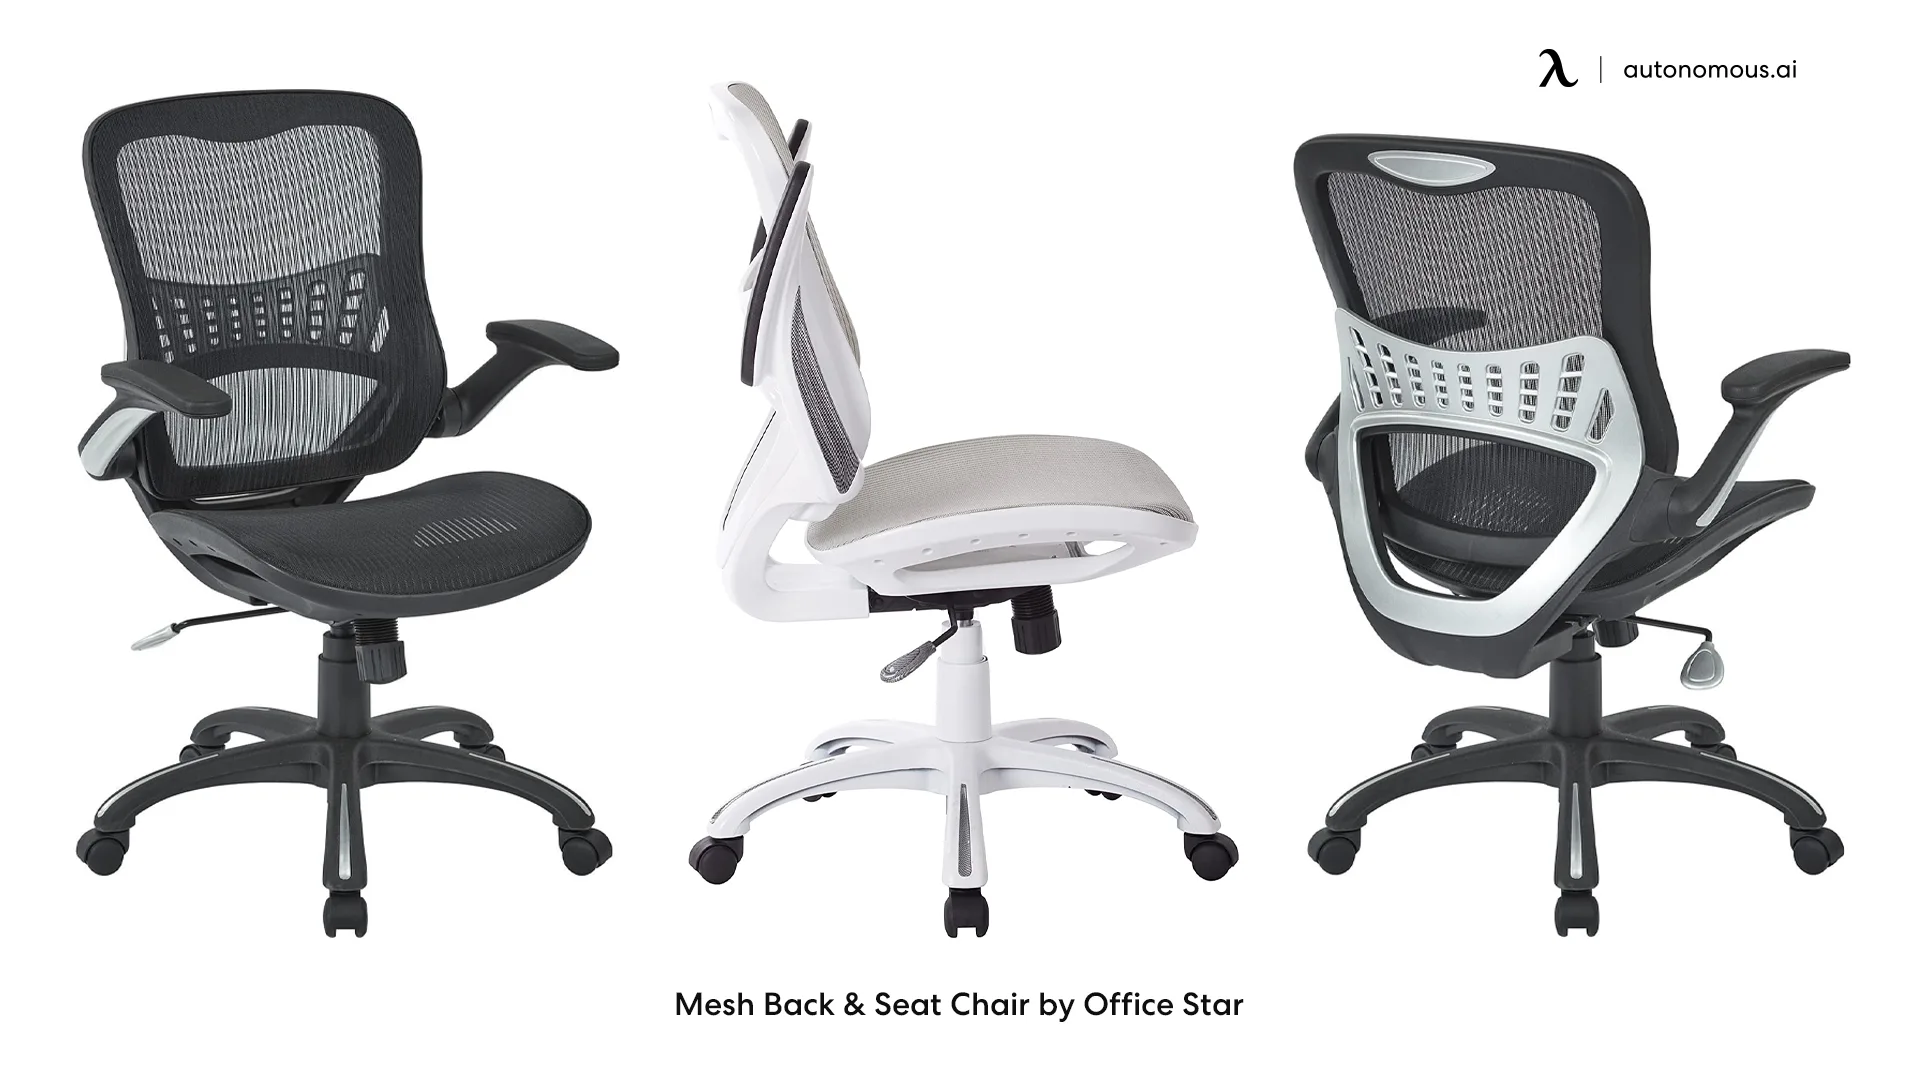 Mesh Back & Seat mesh office chair by Office Star